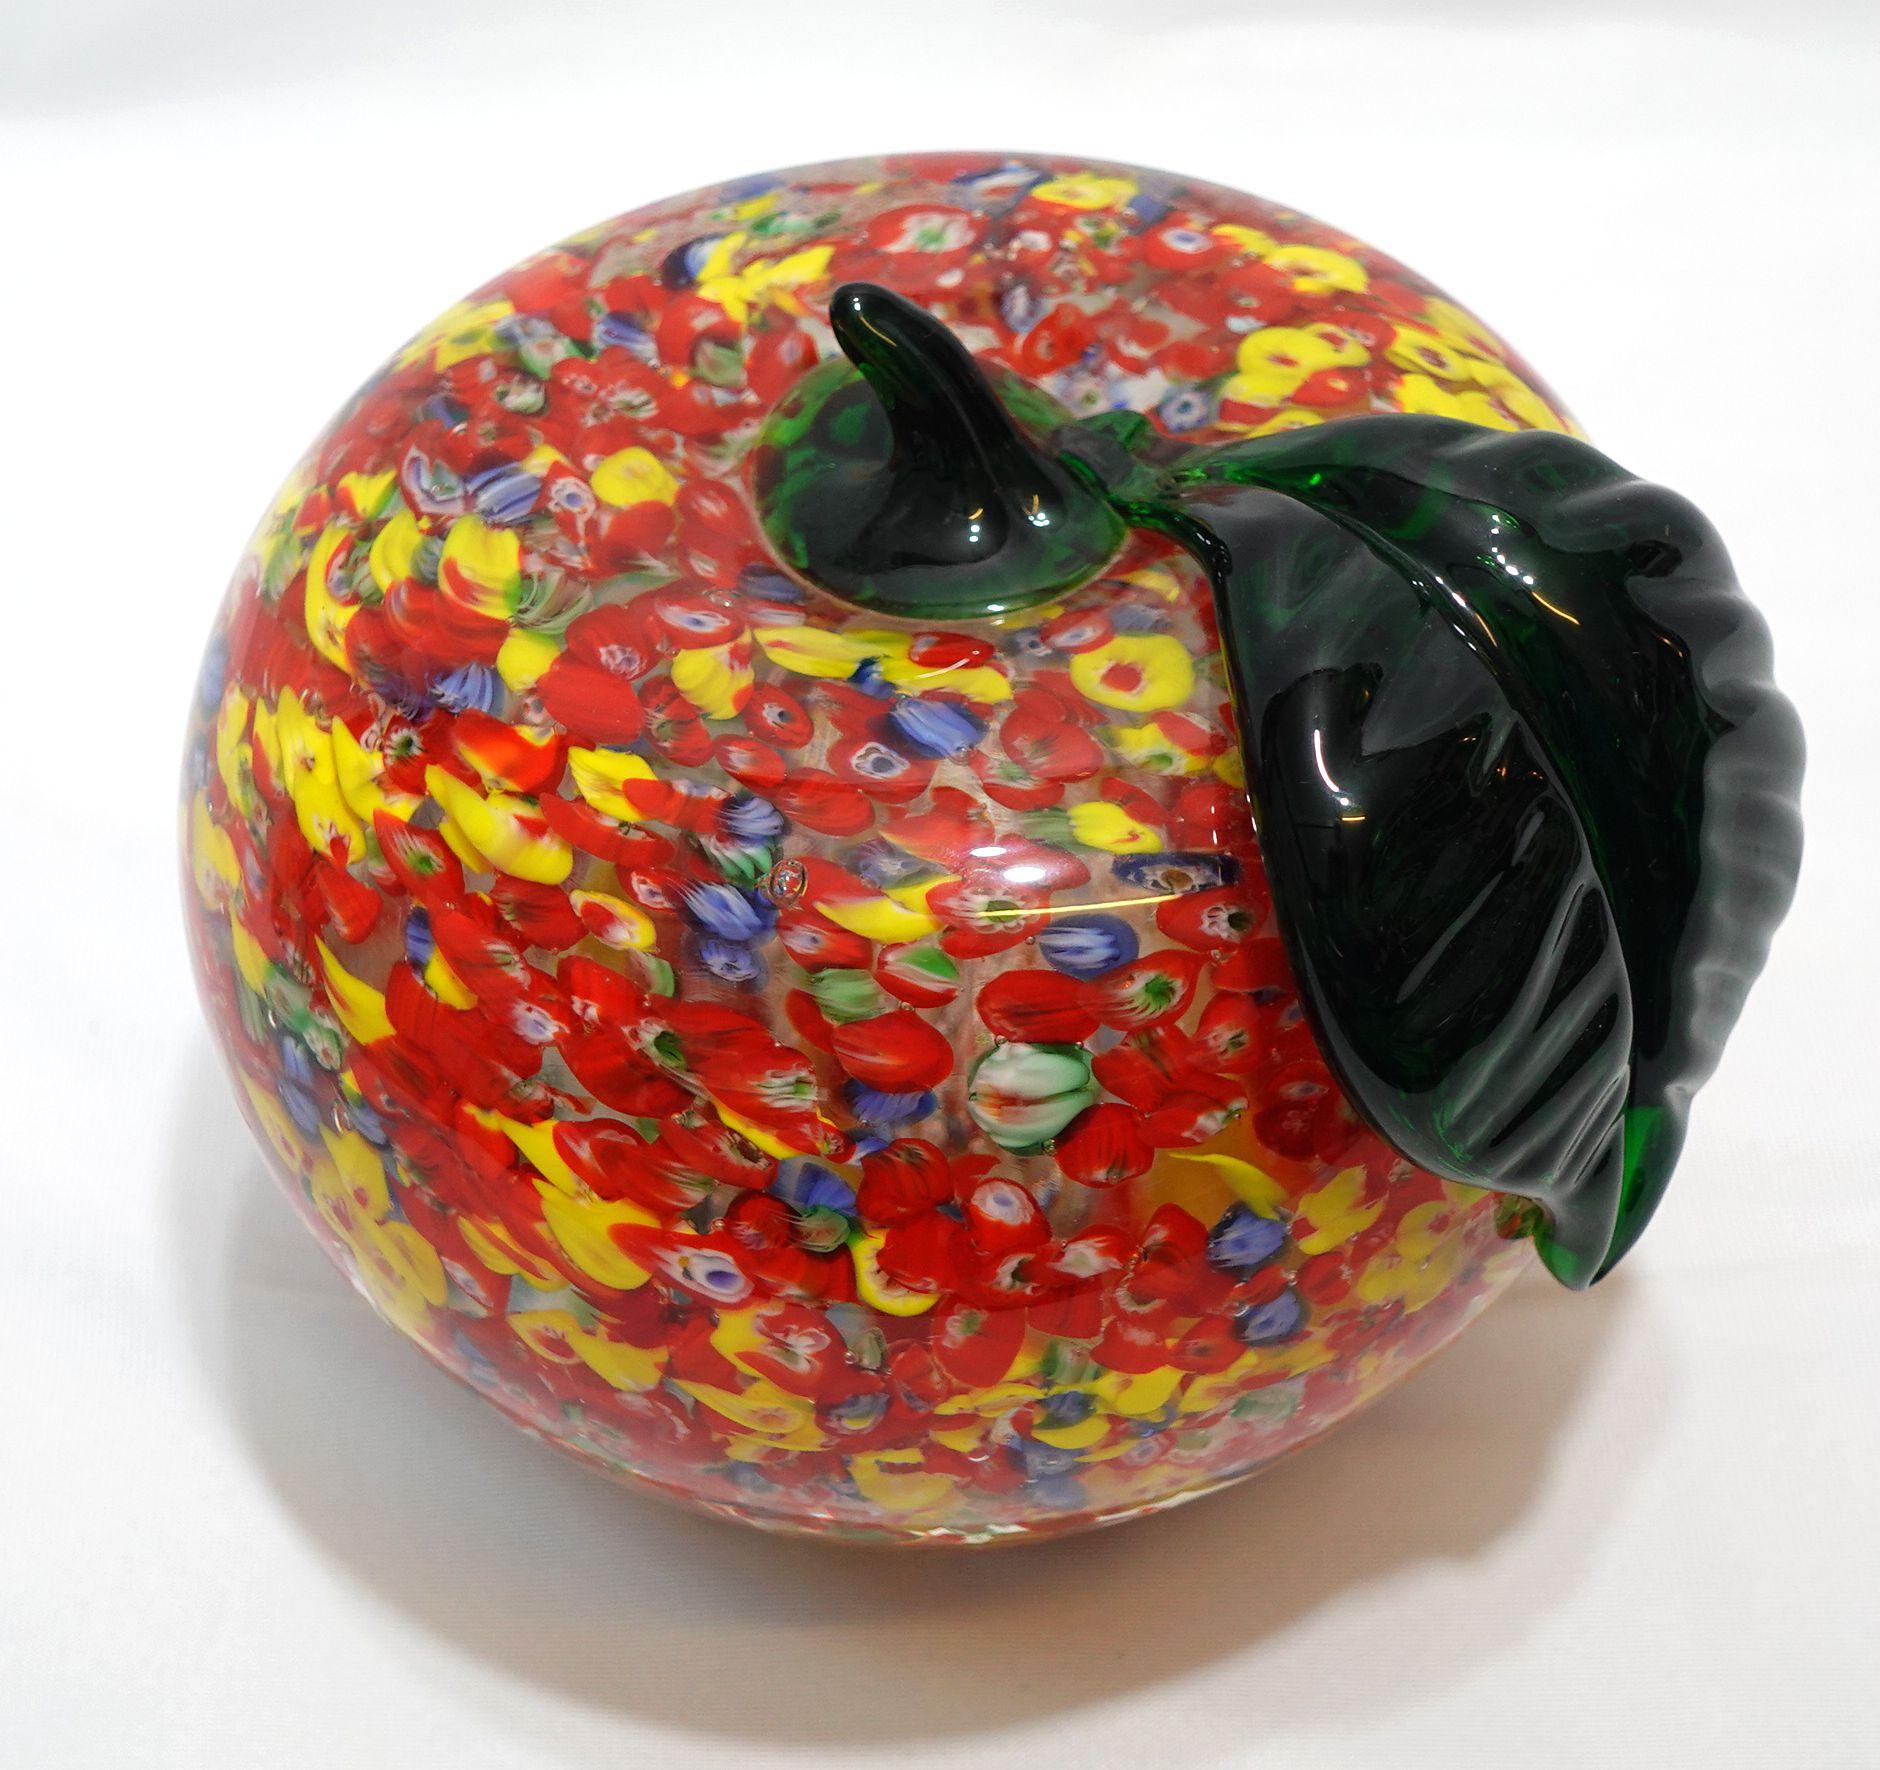 This is a Large solid and Heavy Murano Hand Blown Big Apple Art Glass with colorful Murrine on the entire body, green stem, and a leaf on the top.